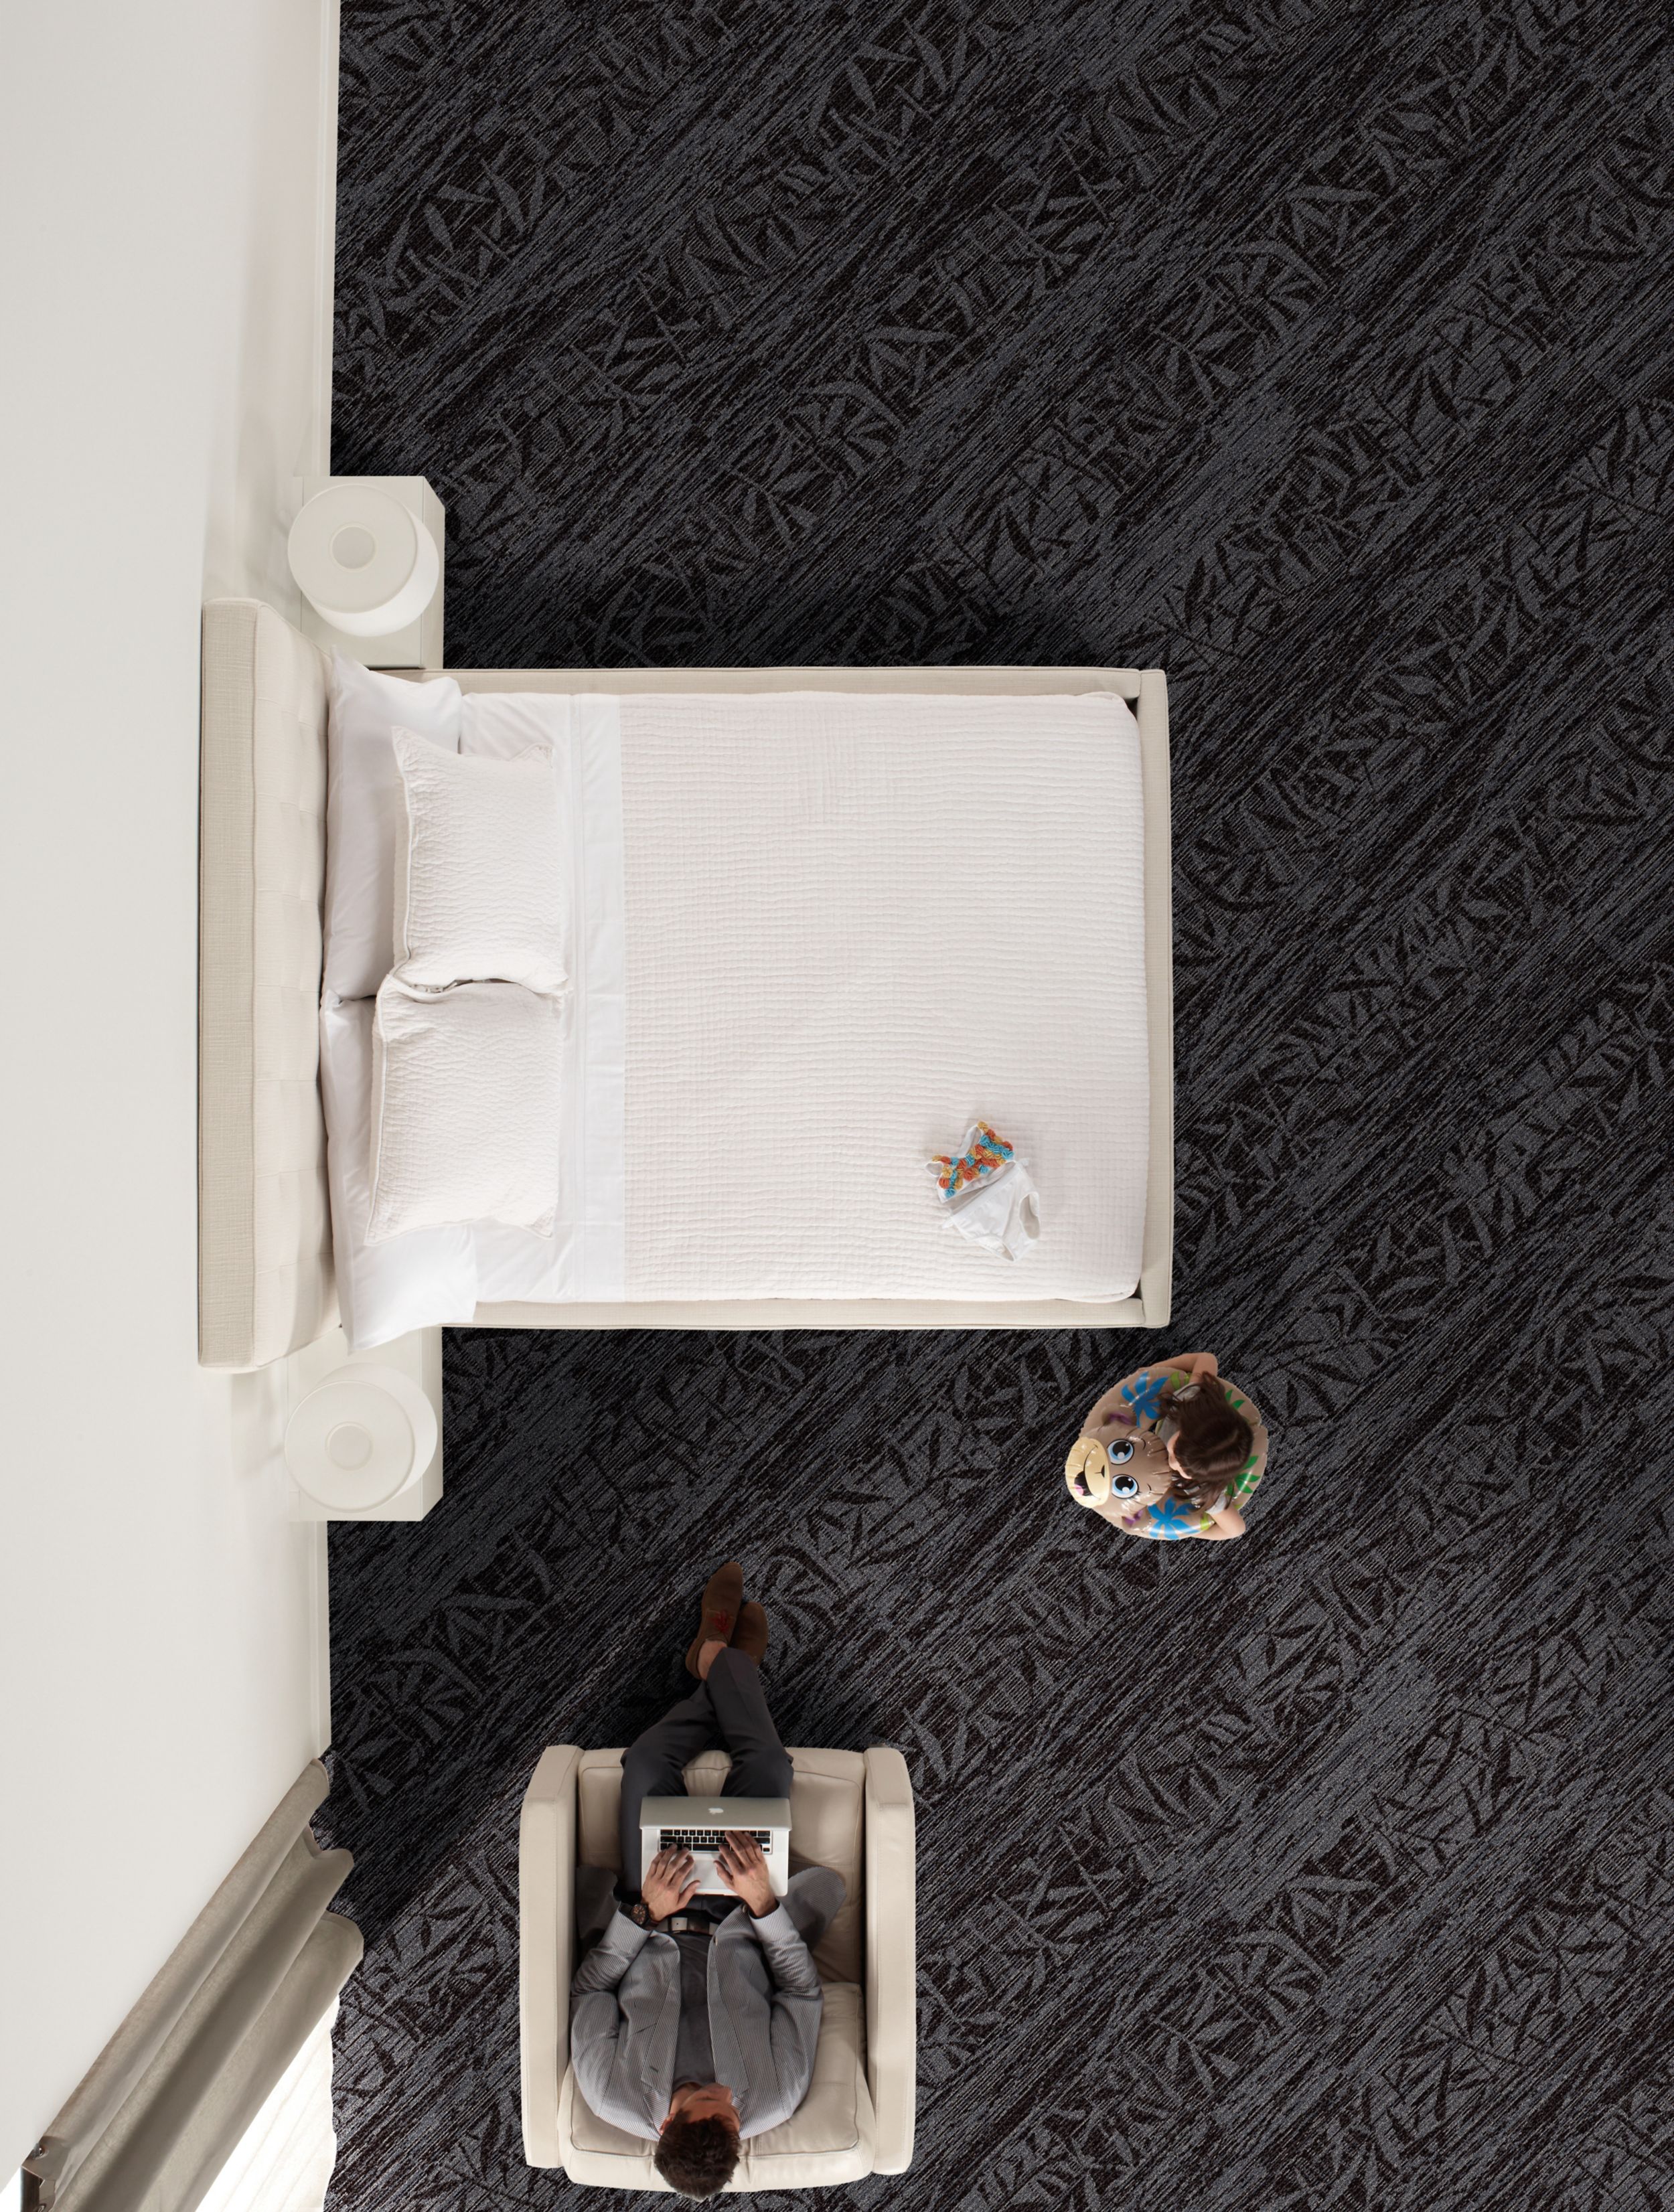 Interface RMS 507 and RMS 508 plank carpet tile in hotel guest room with woman on computer and girl holding stuffed animal numéro d’image 7